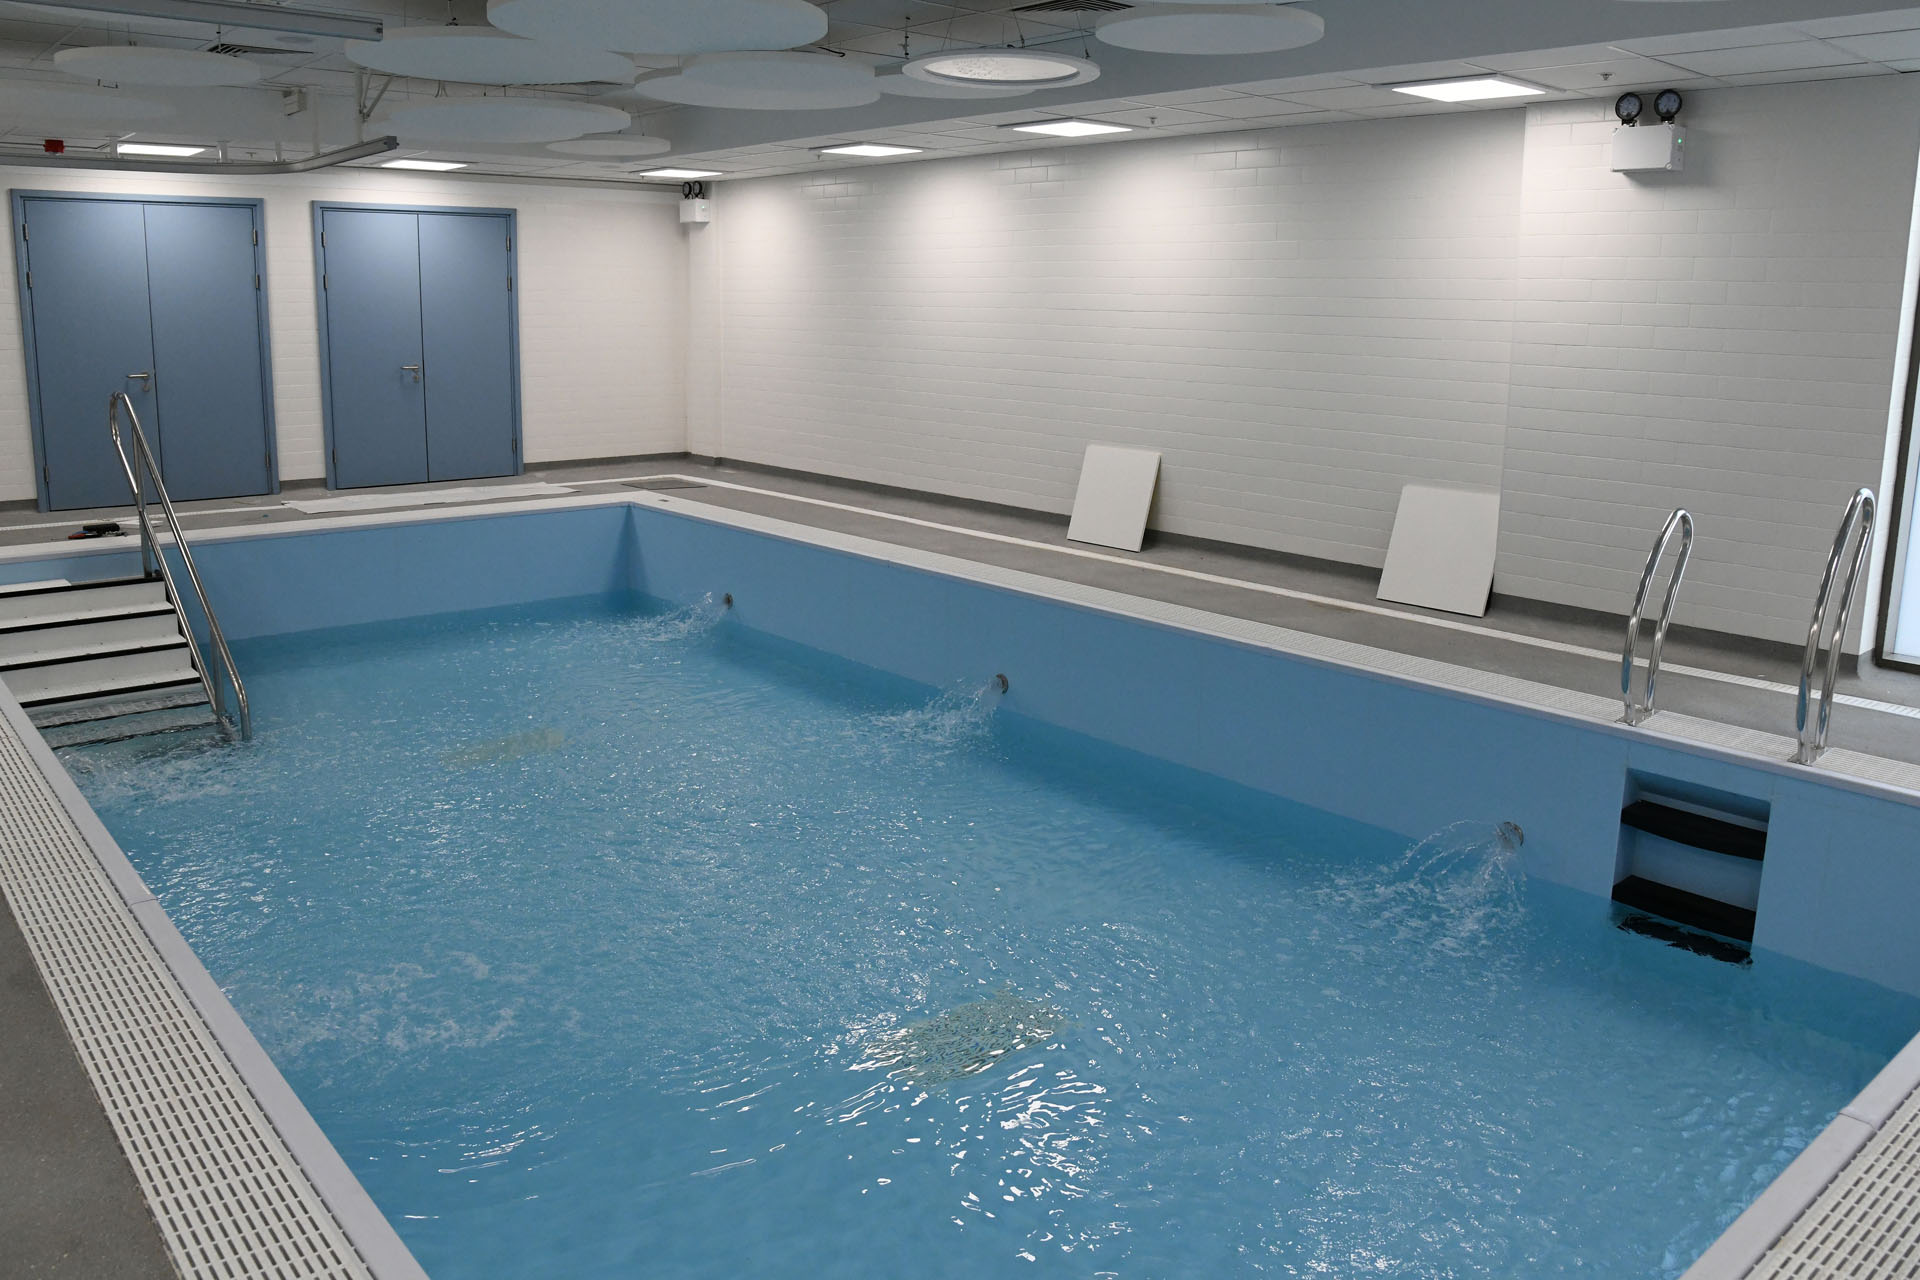 Making a splash: A hydrotherapy pool at the campus.